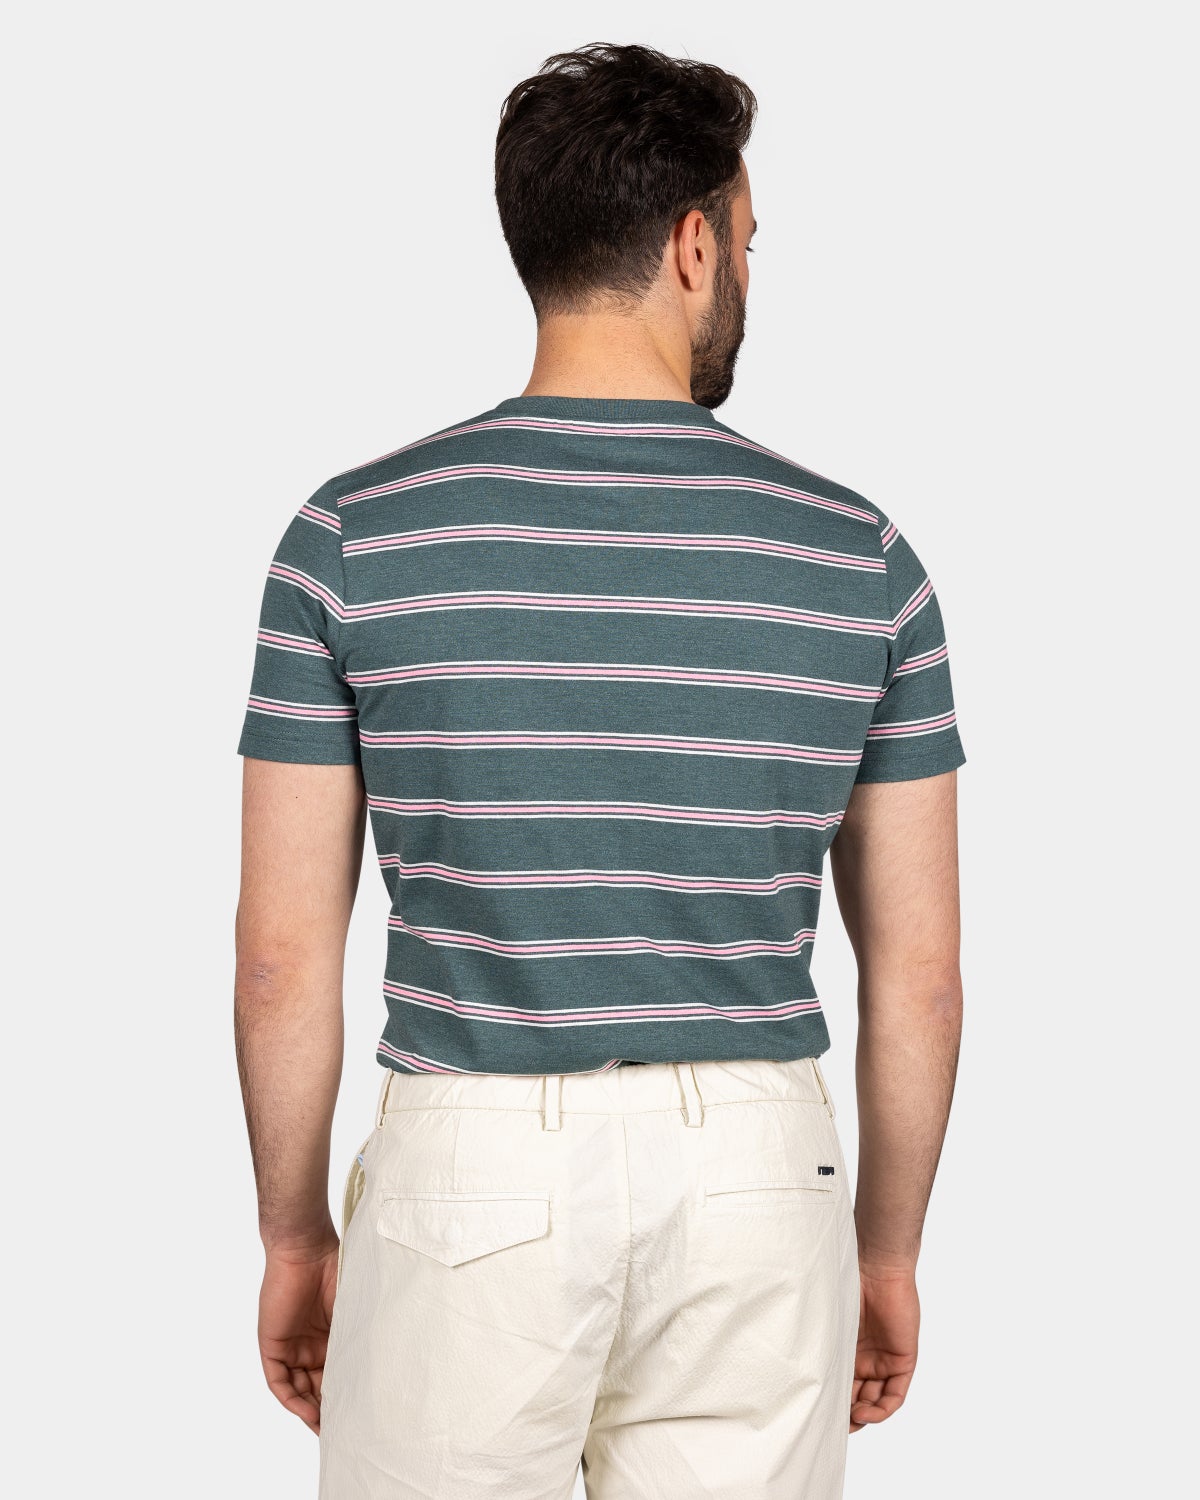 Green t-shirt with orange stripes - Classic Green